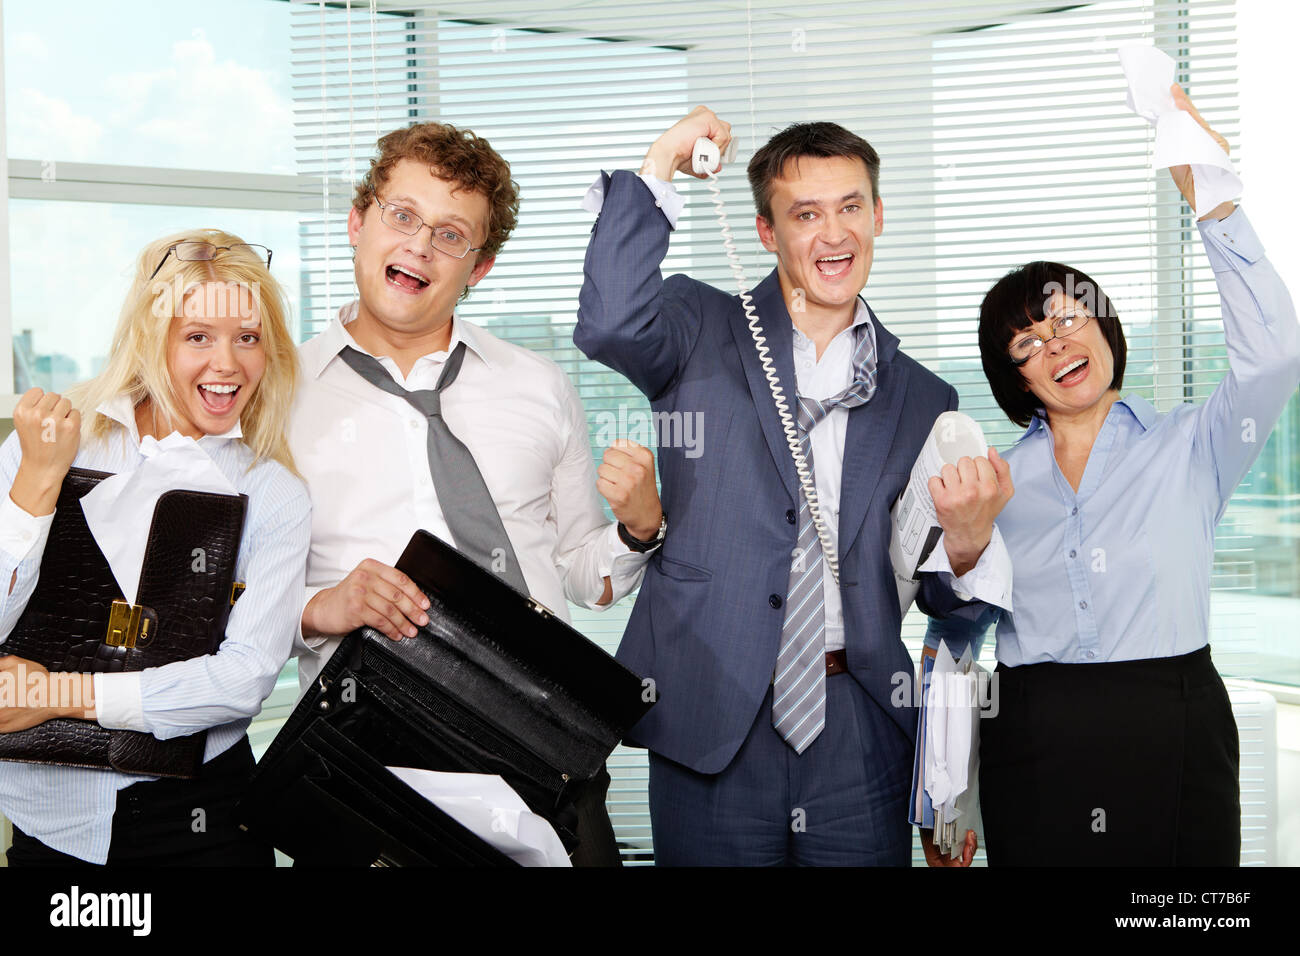 Group of tired businesspeople showing gladness after making excellent deal Stock Photo